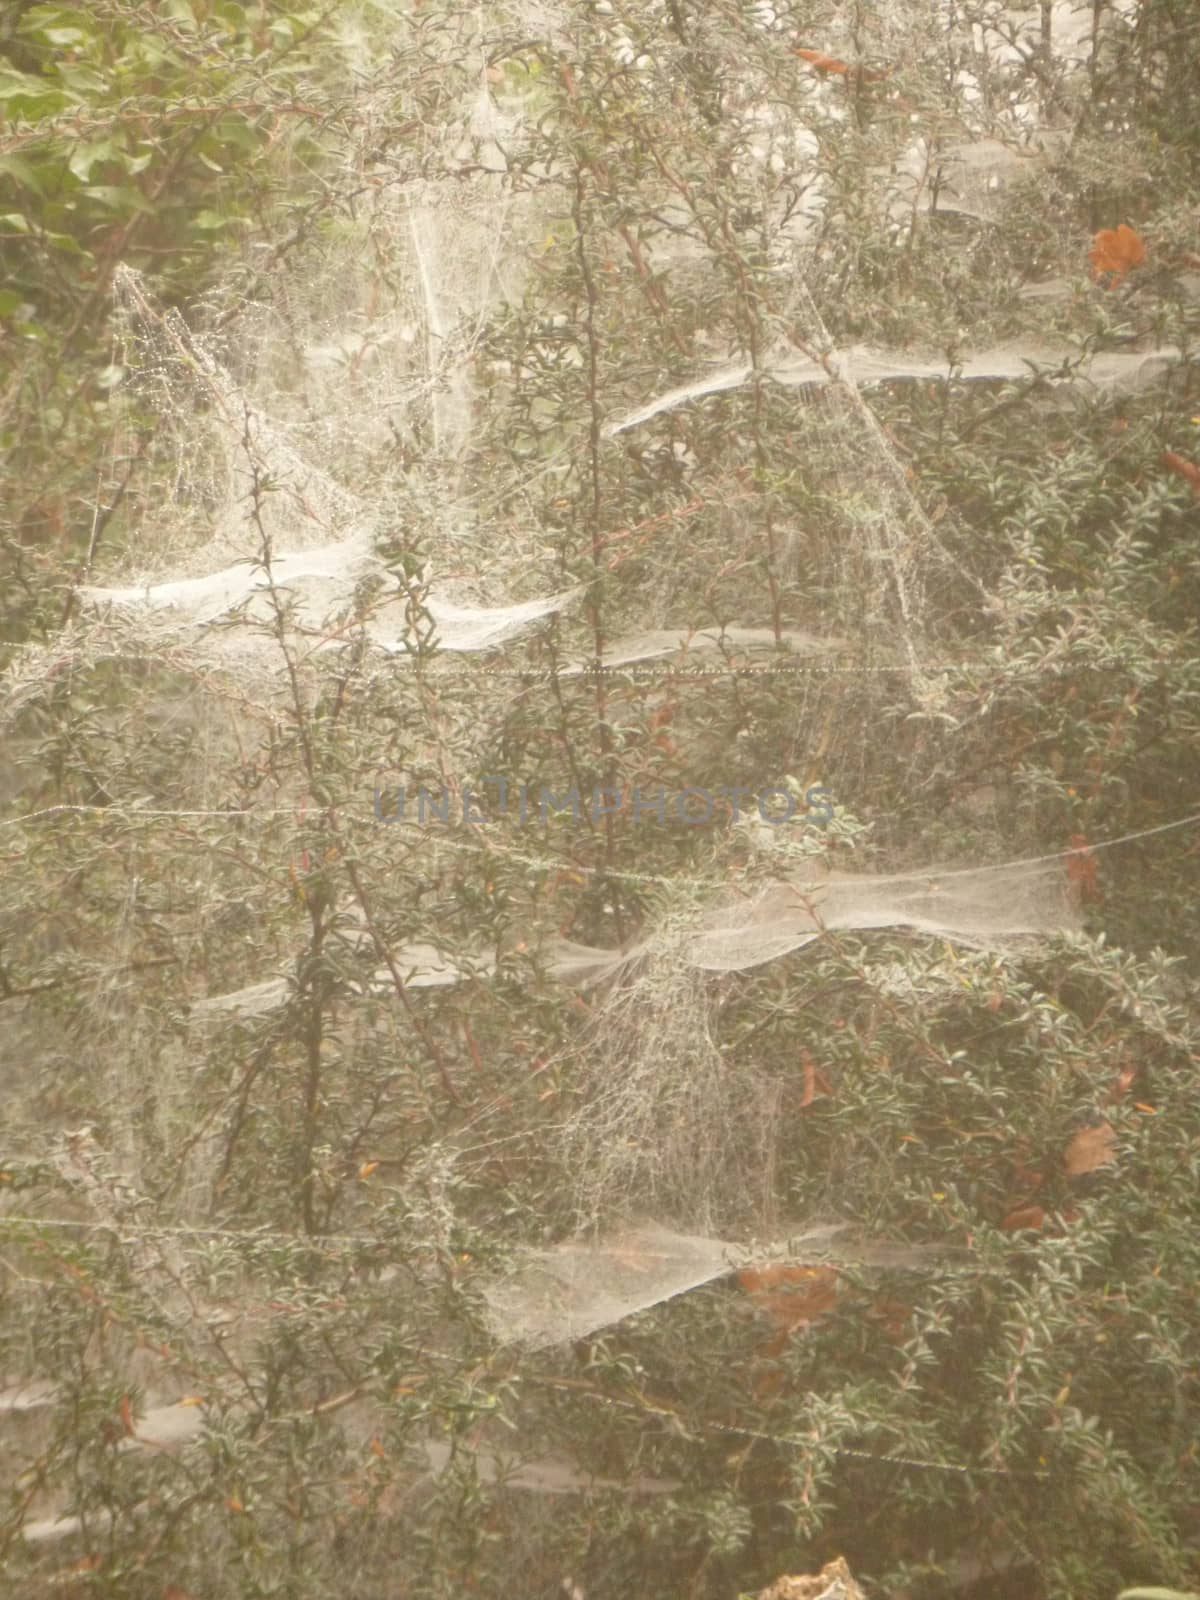 Group of spider webs covered in droplets in fog